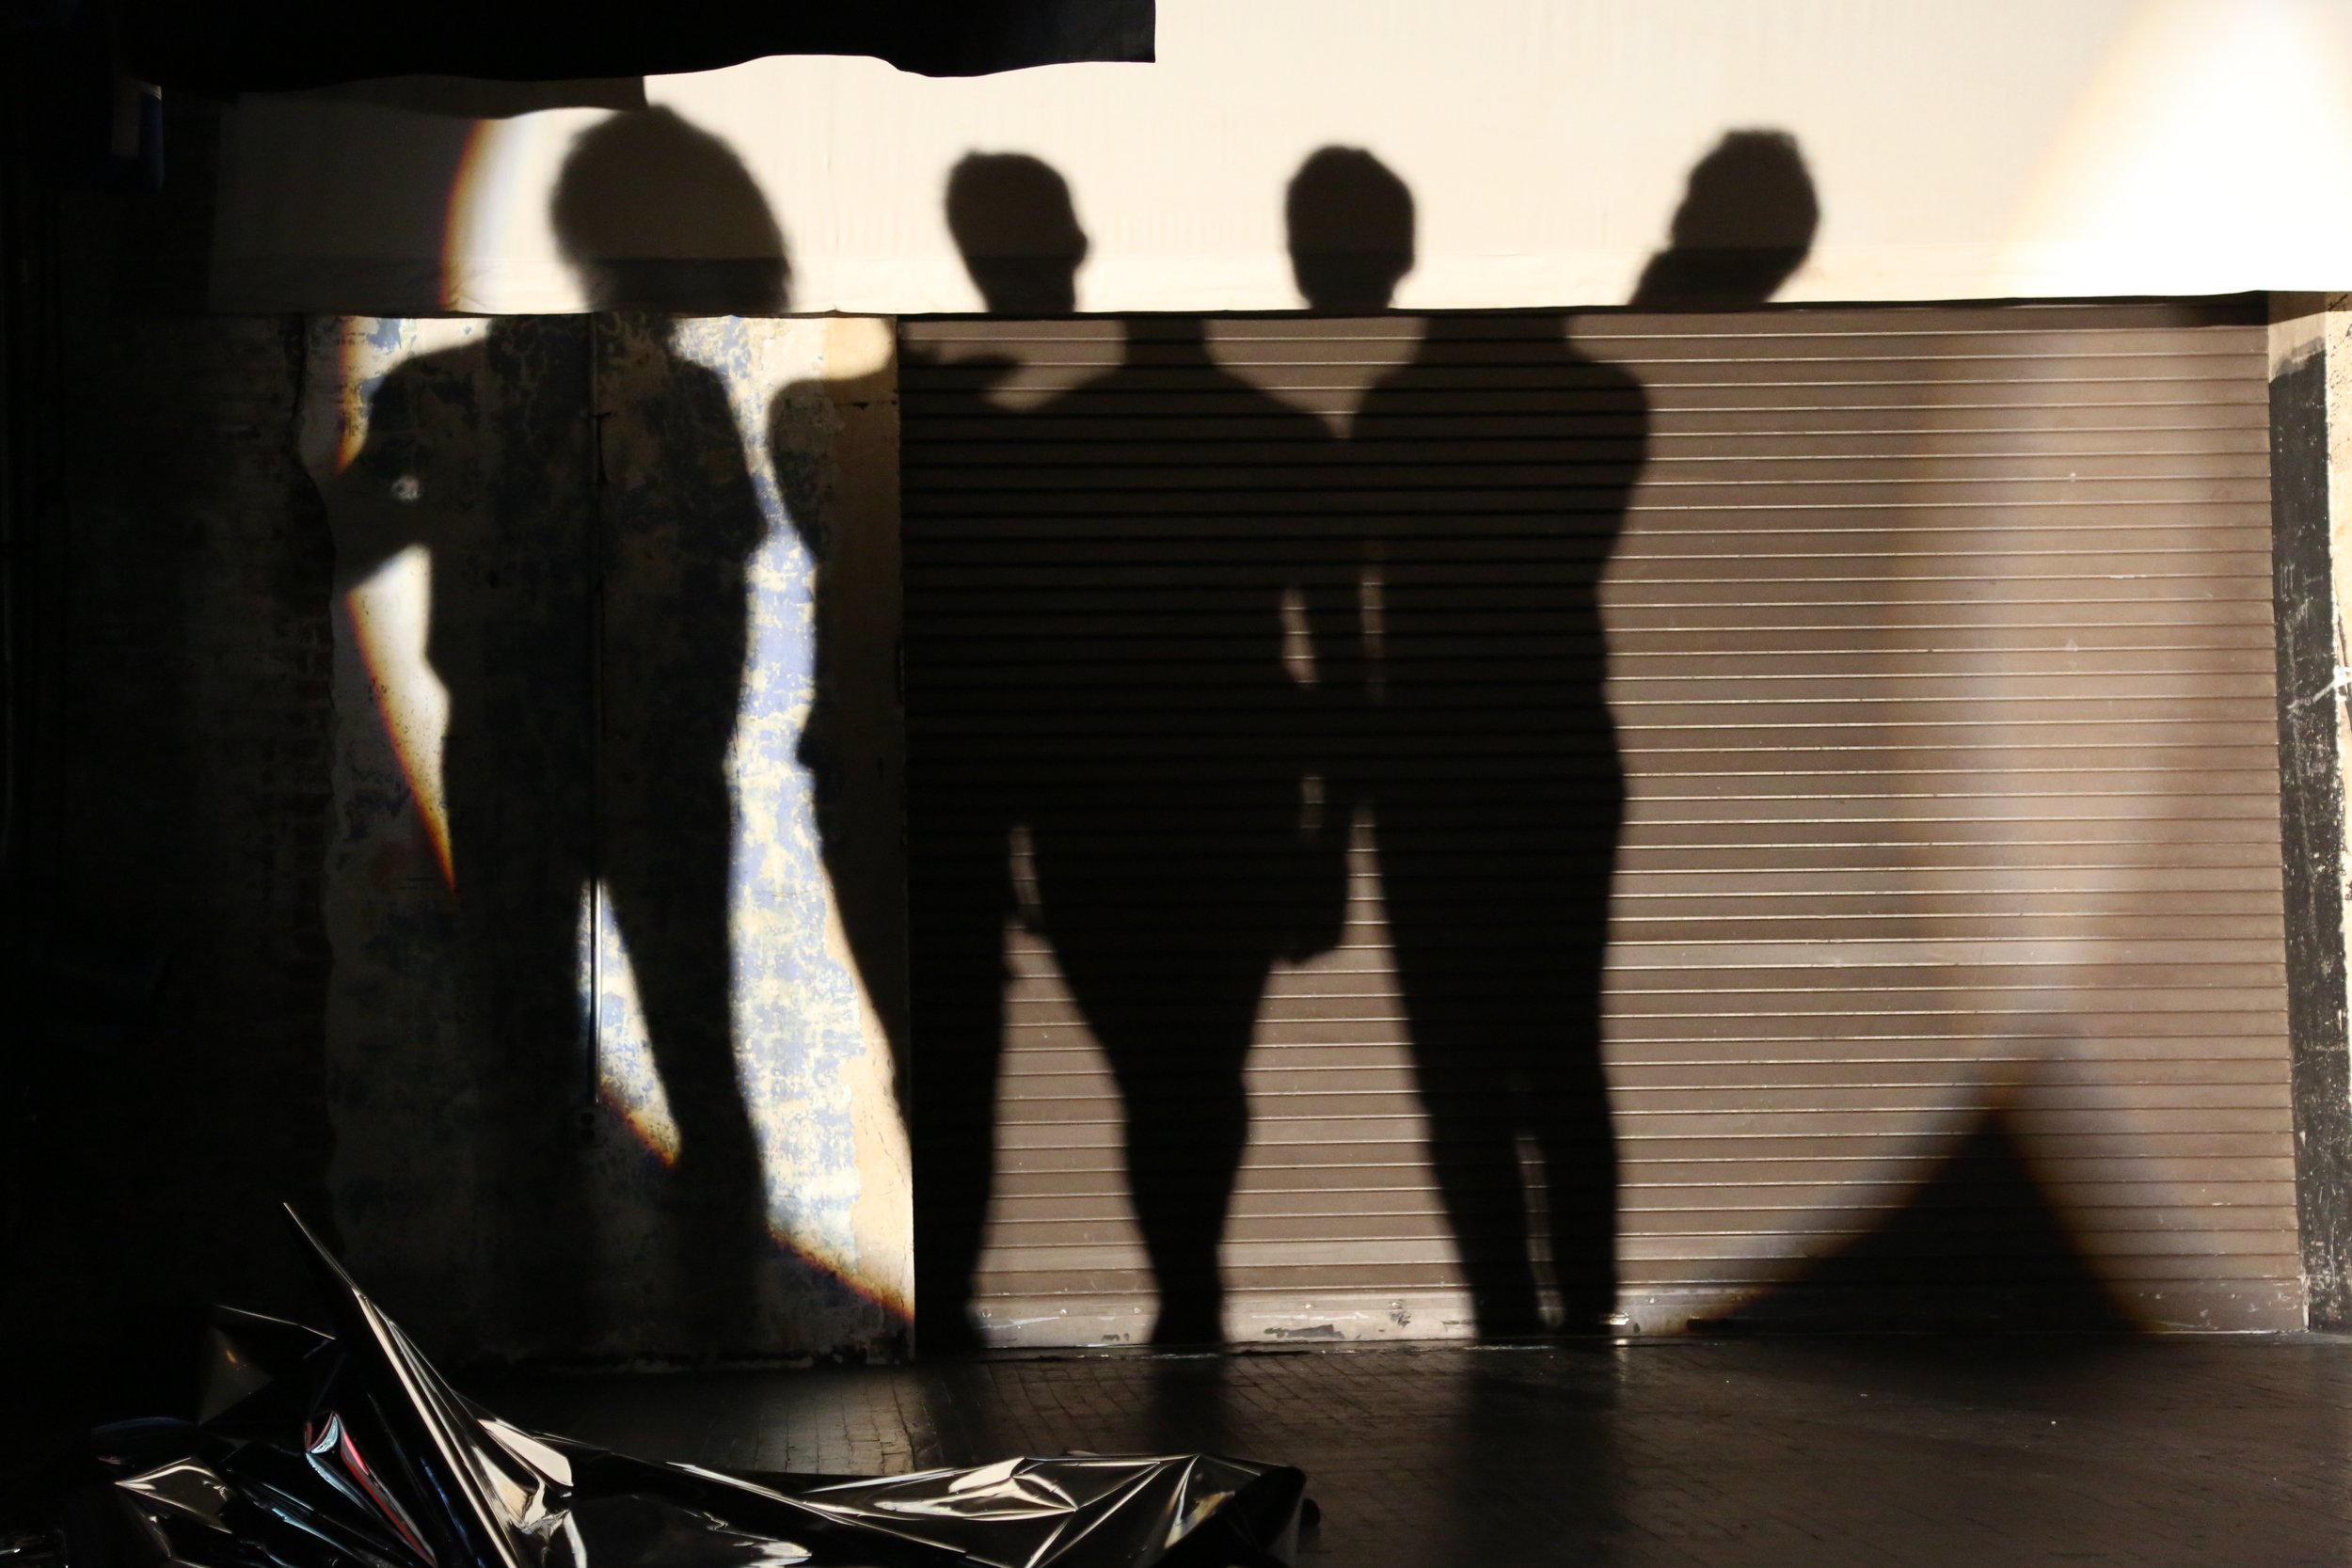 The shadows of four performers standing together are cast on the back wall of a stage in a large spotlight. Photo by Brian Rogers.